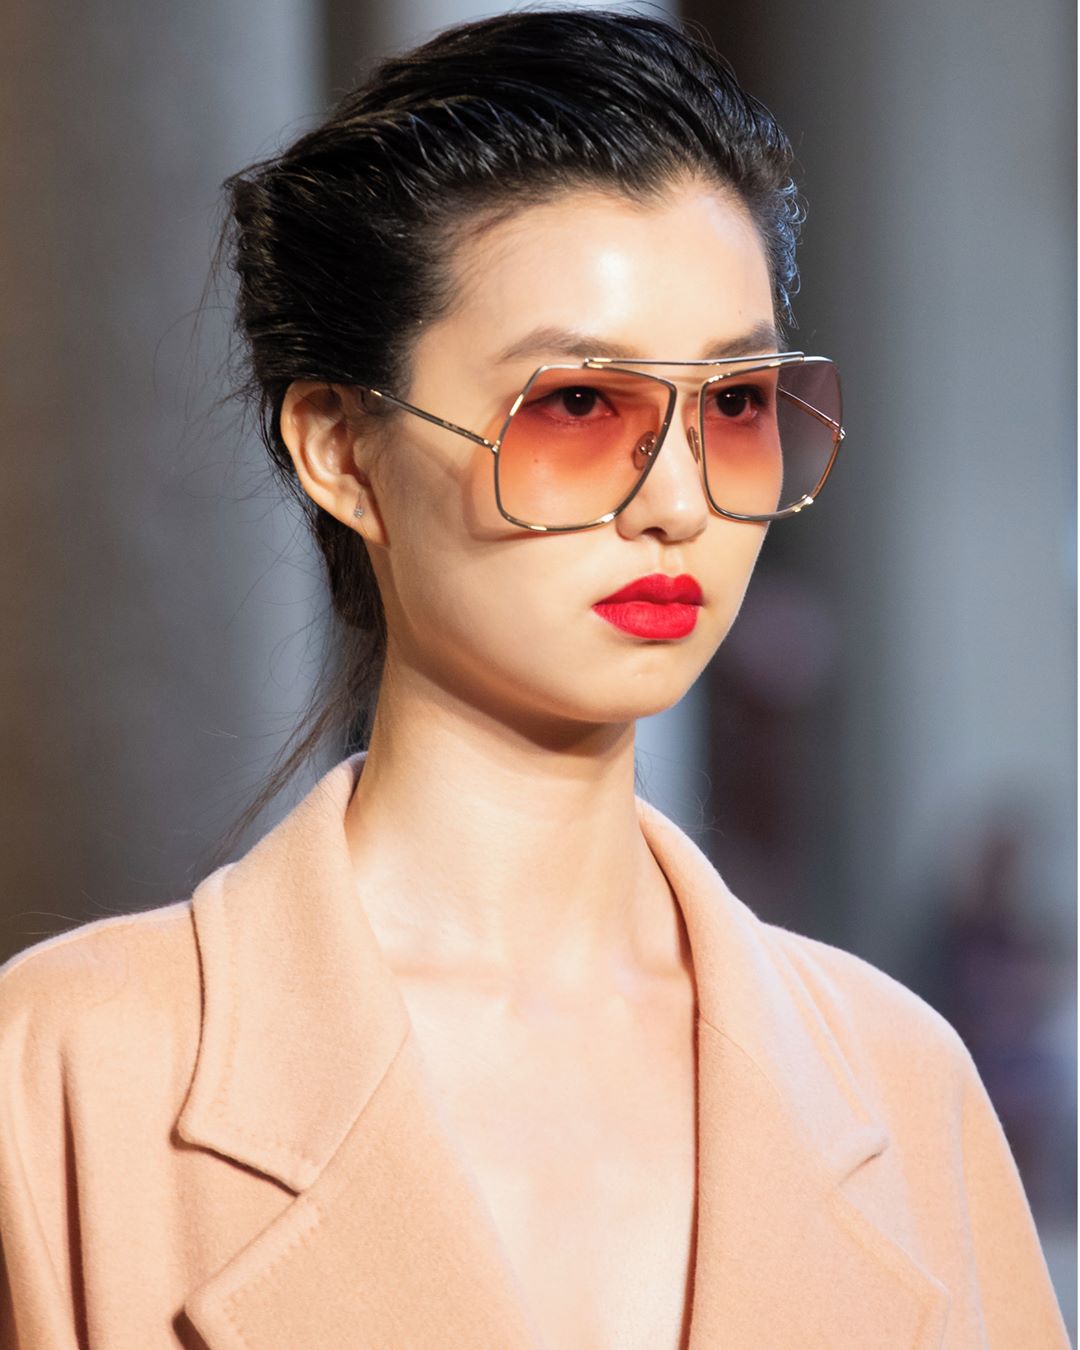 Max Mara - Introducing the latest from #MaxMaraEyewear. Retro shapes and eye-catching, tinted hues are seen in the new oversized designs on the #MaxMaraSS21 runway.⁣
⁣
#MaxMara #MFW